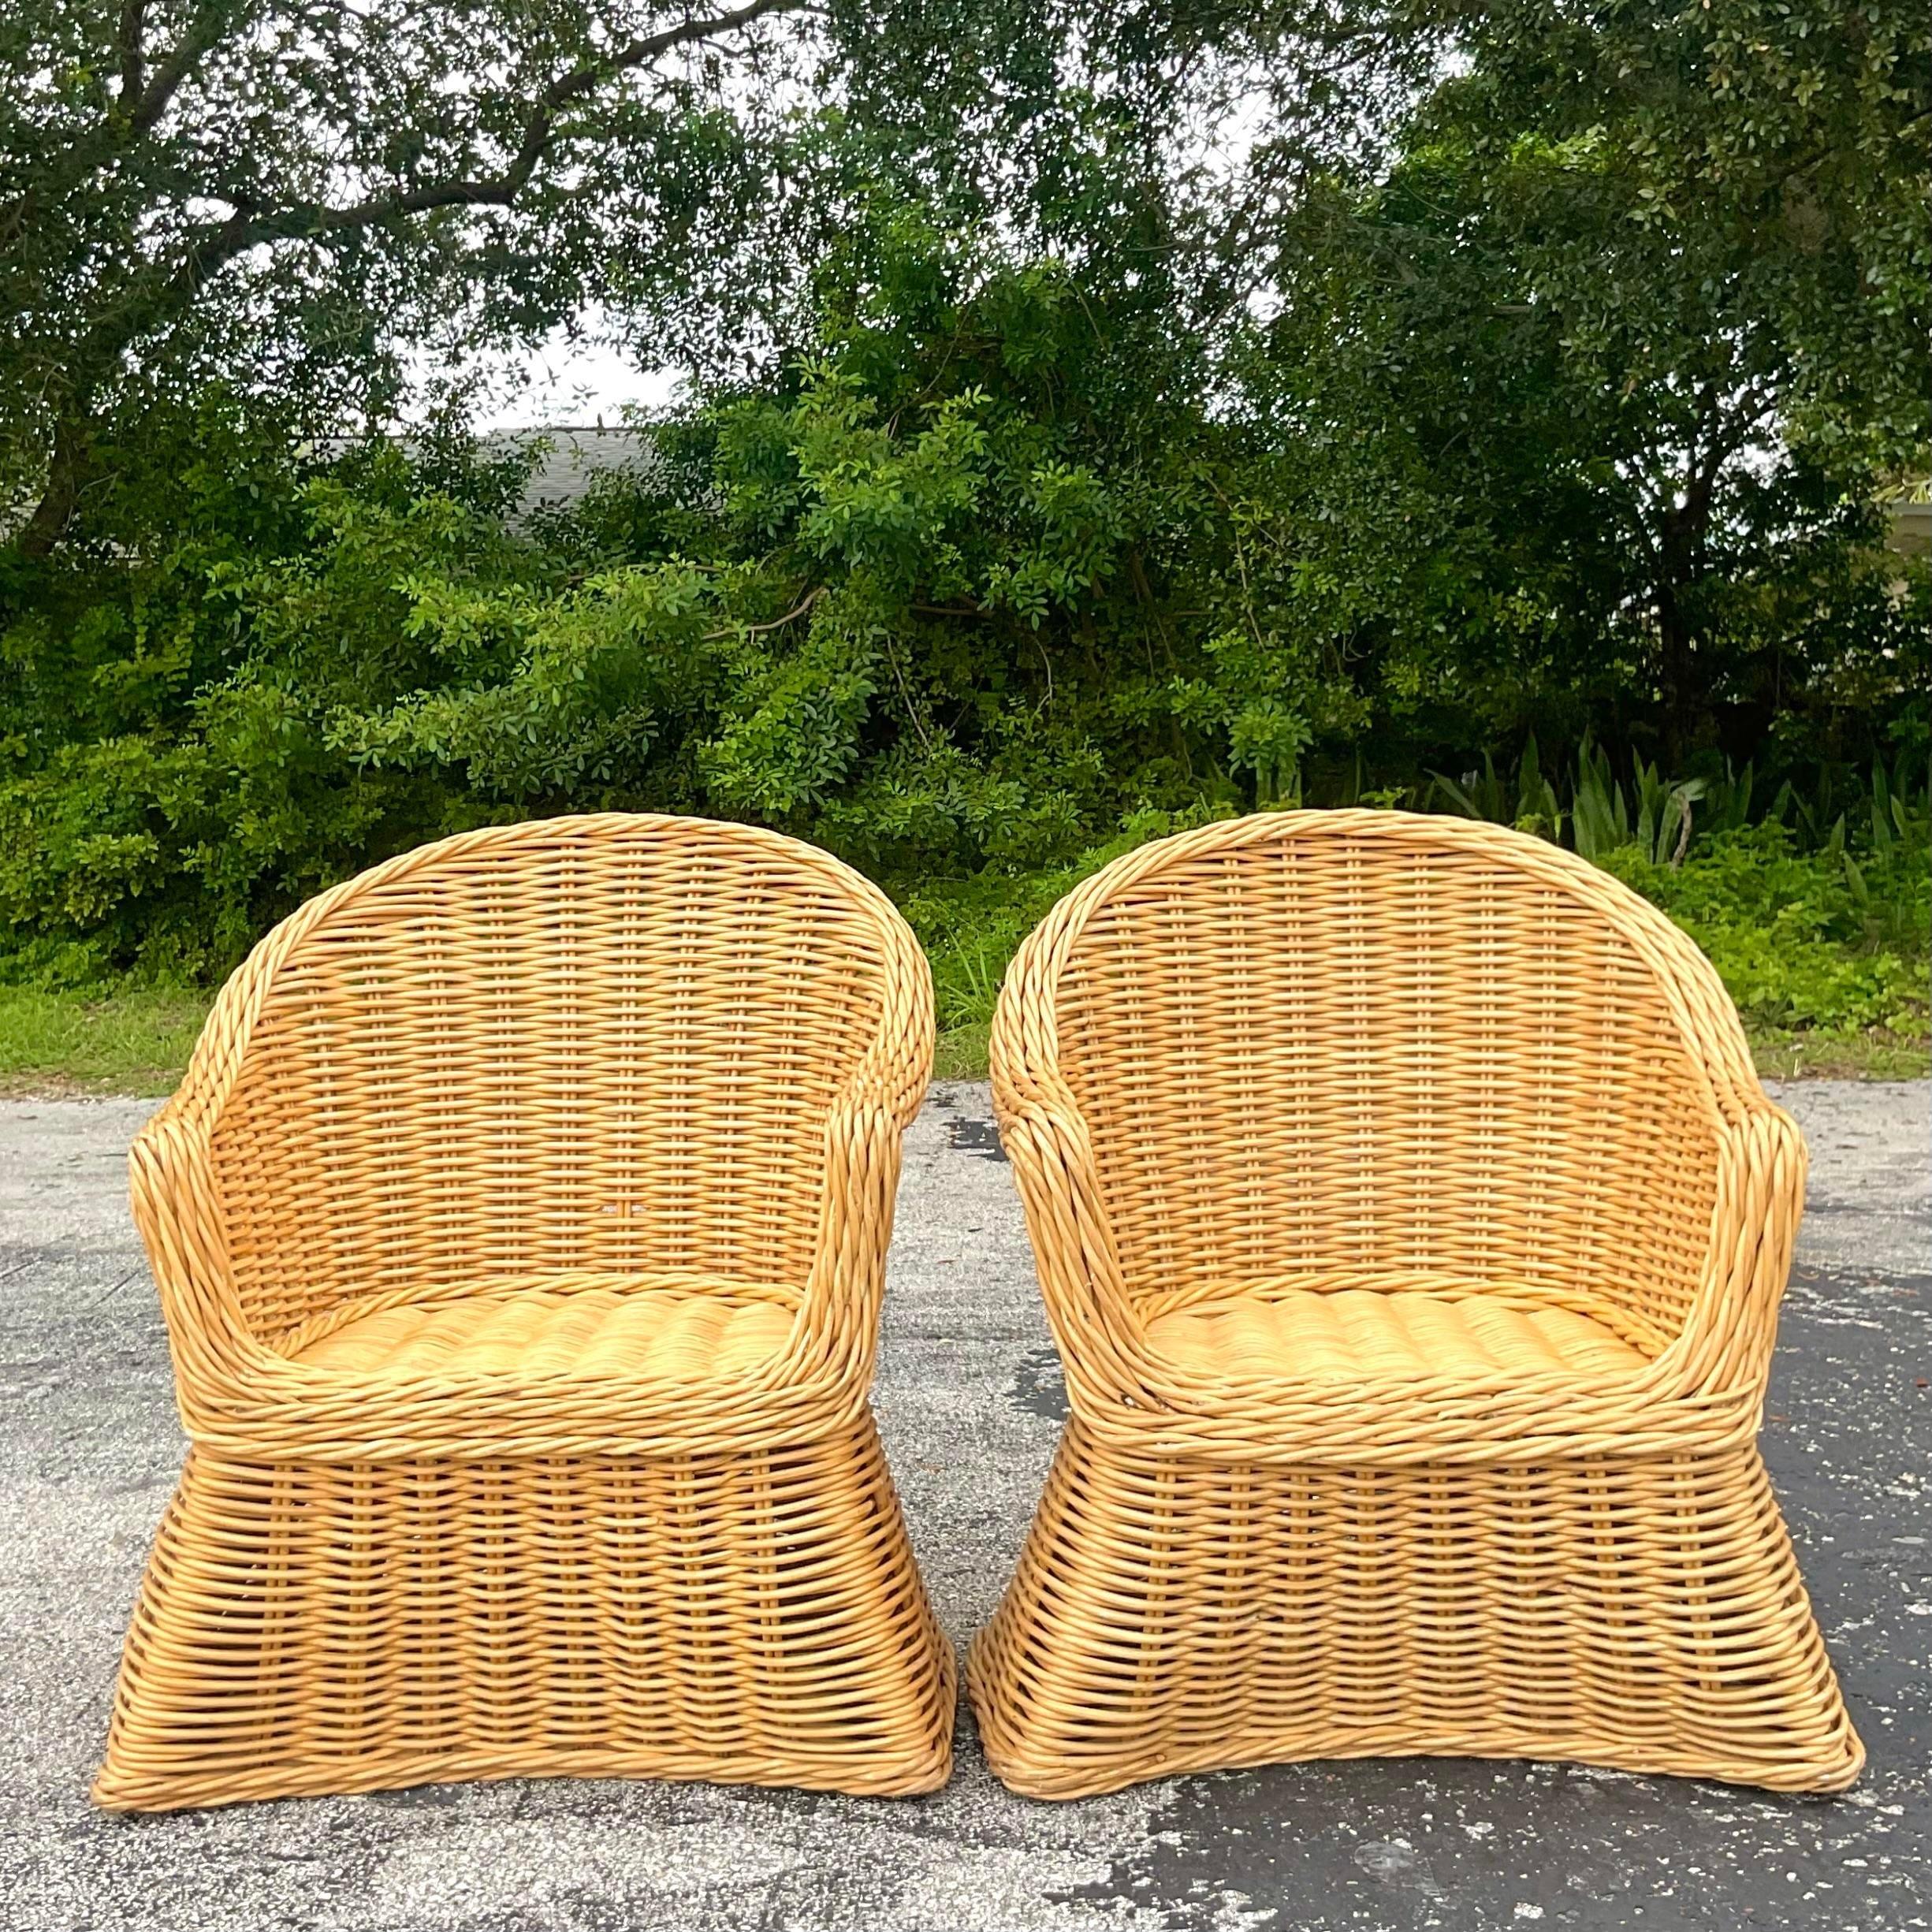 Vintage Coastal Woven Rattan Arm Chairs - a Pair For Sale 1